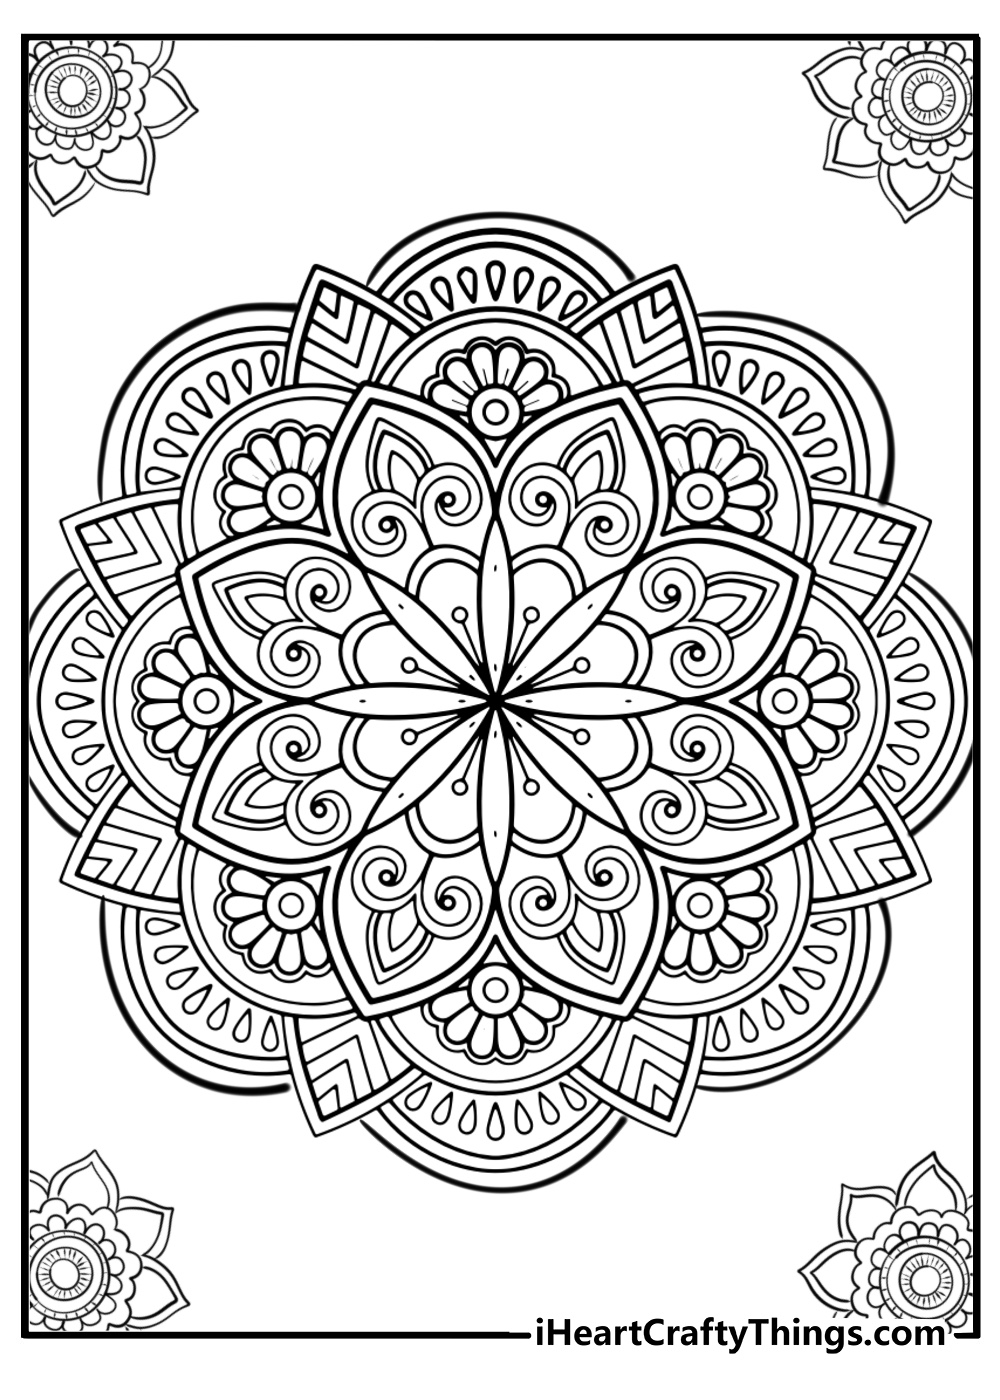 Mandala coloring pages for adults printable